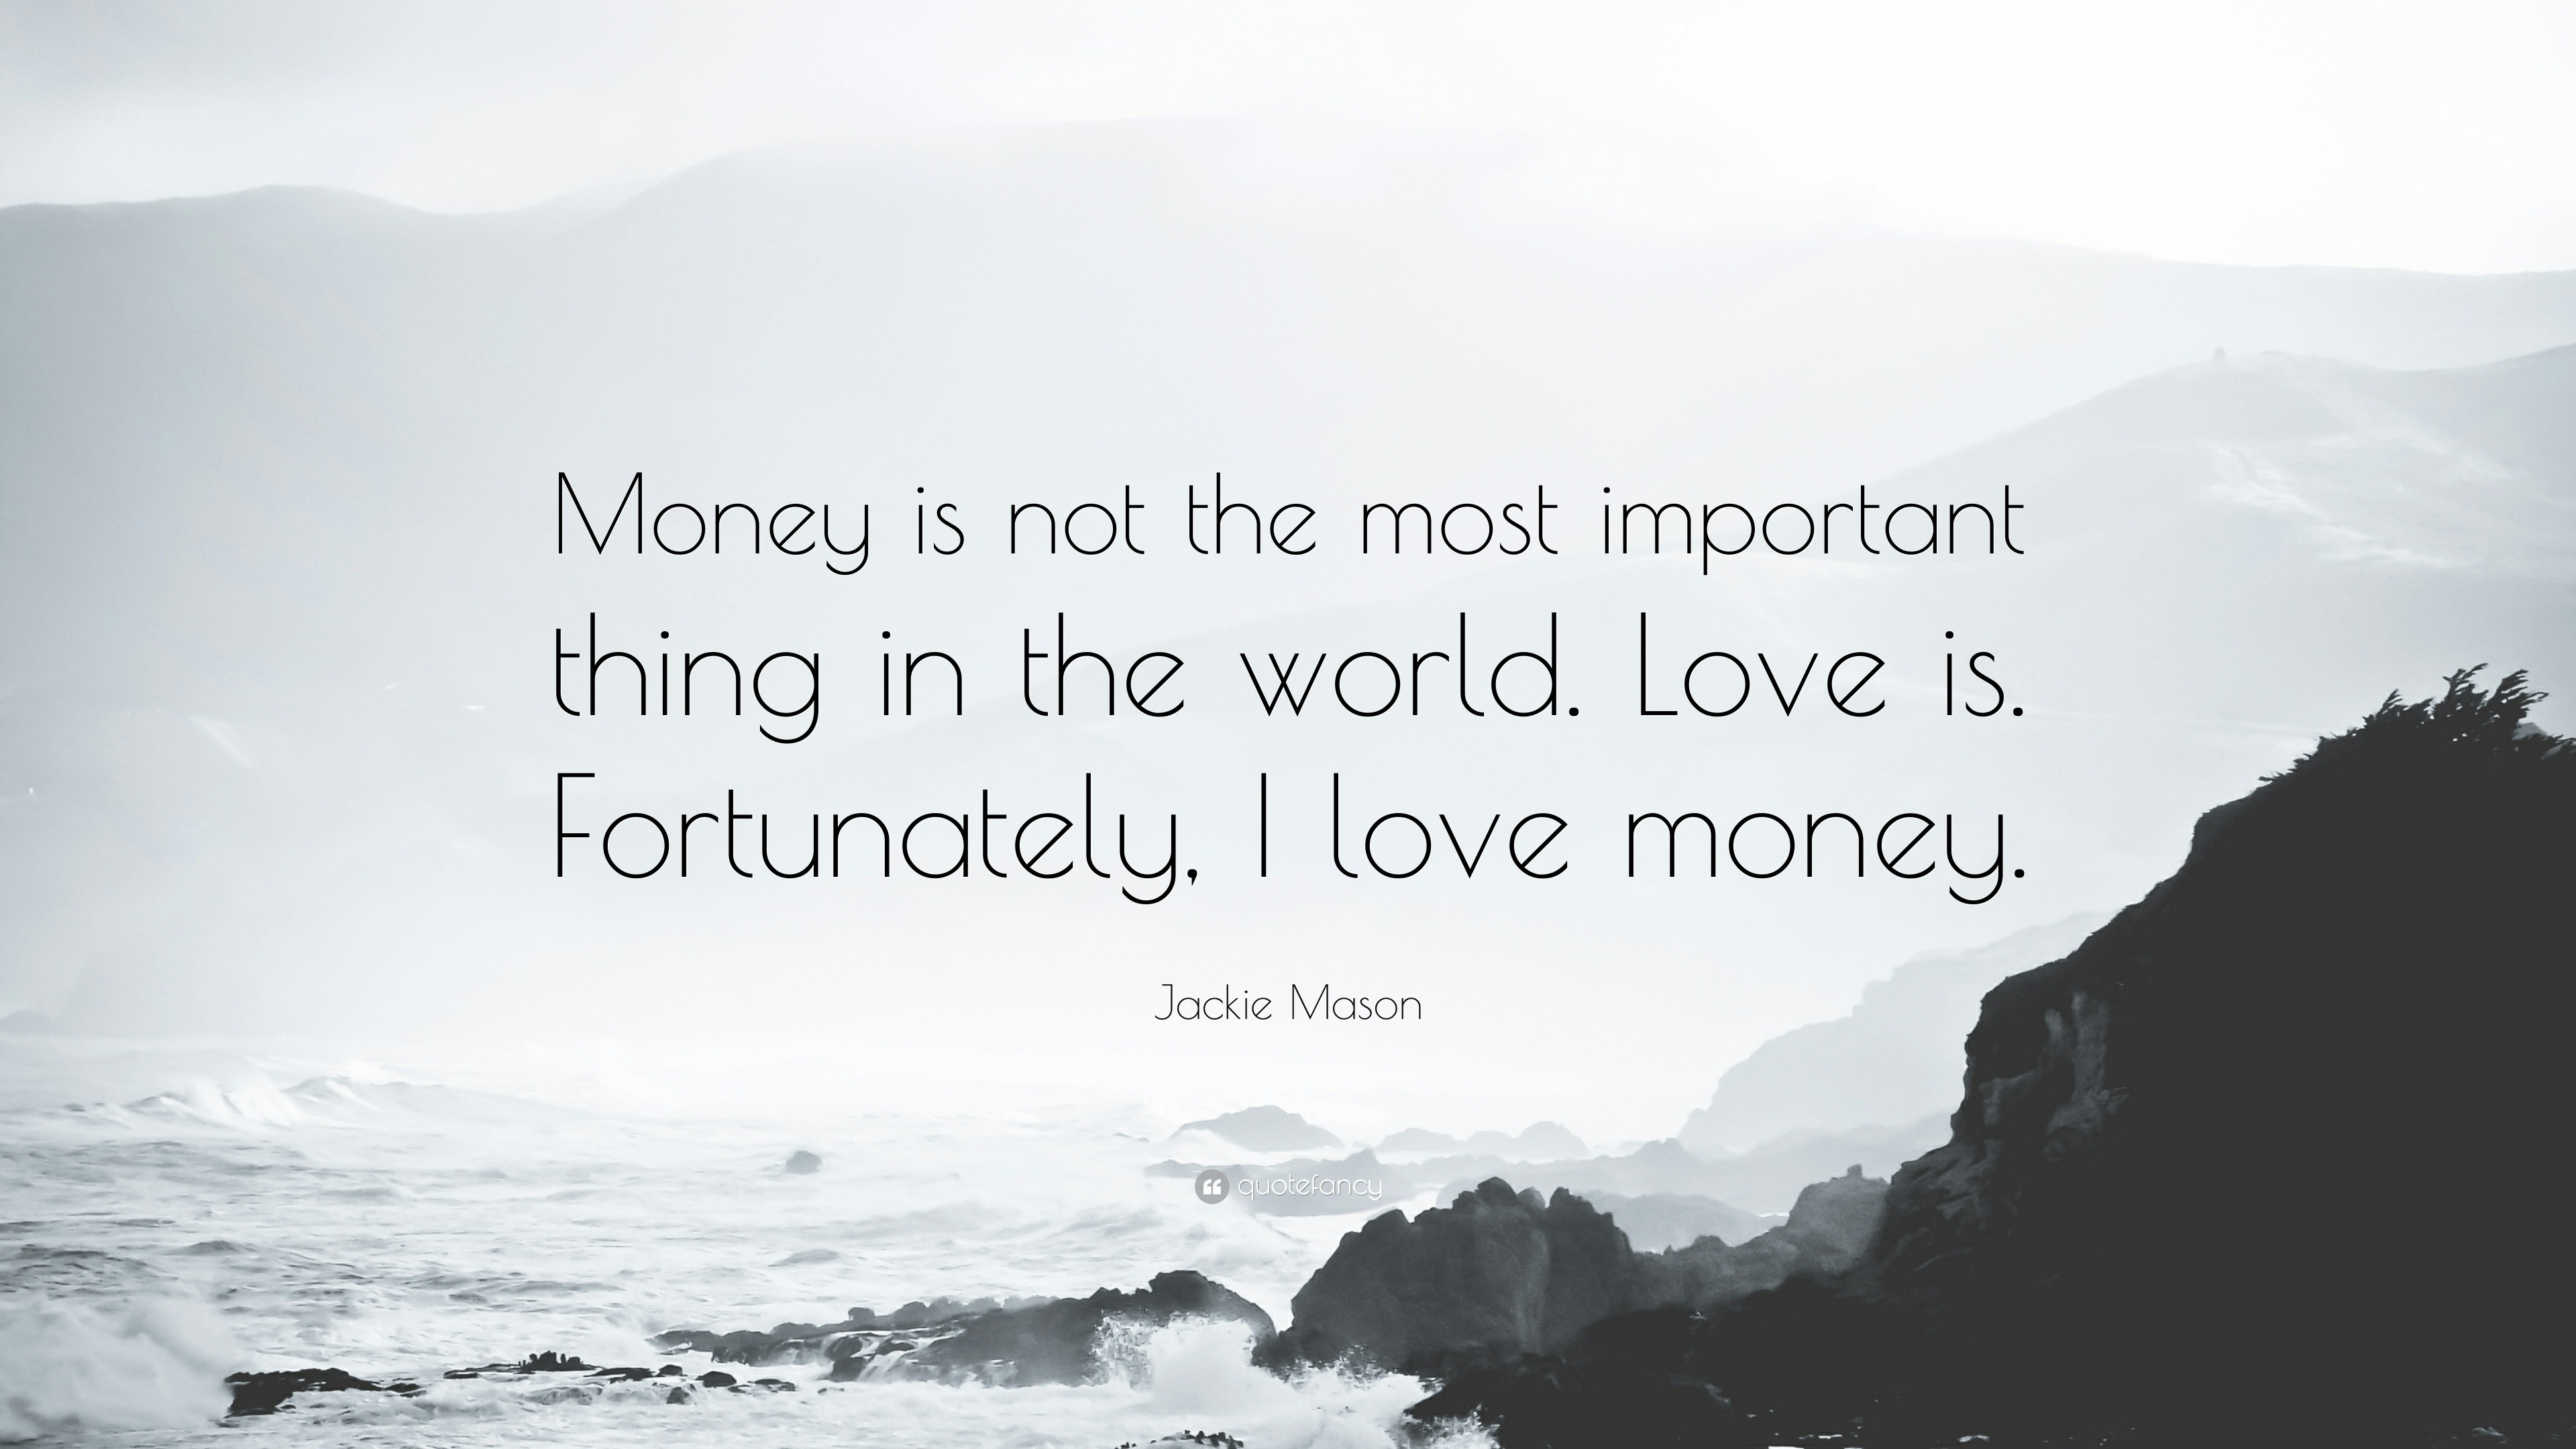 love is not all about money quotes